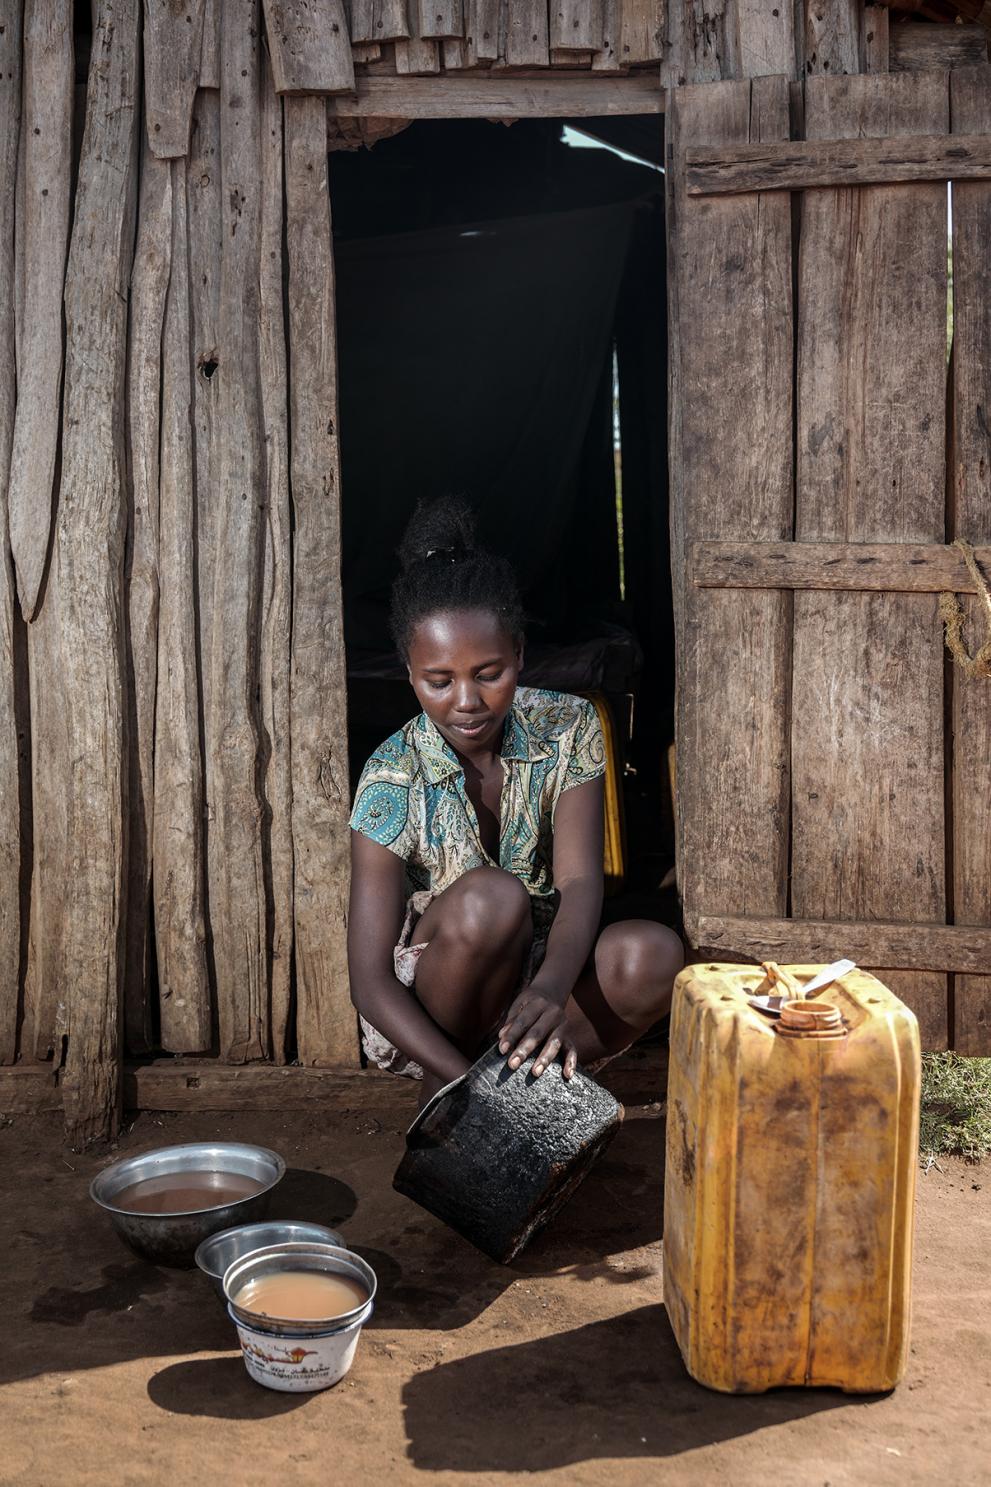 Nearby, Maho’s mother, Toromasy, 20, cleans the pots and plates using the small amount of water she has just collected.